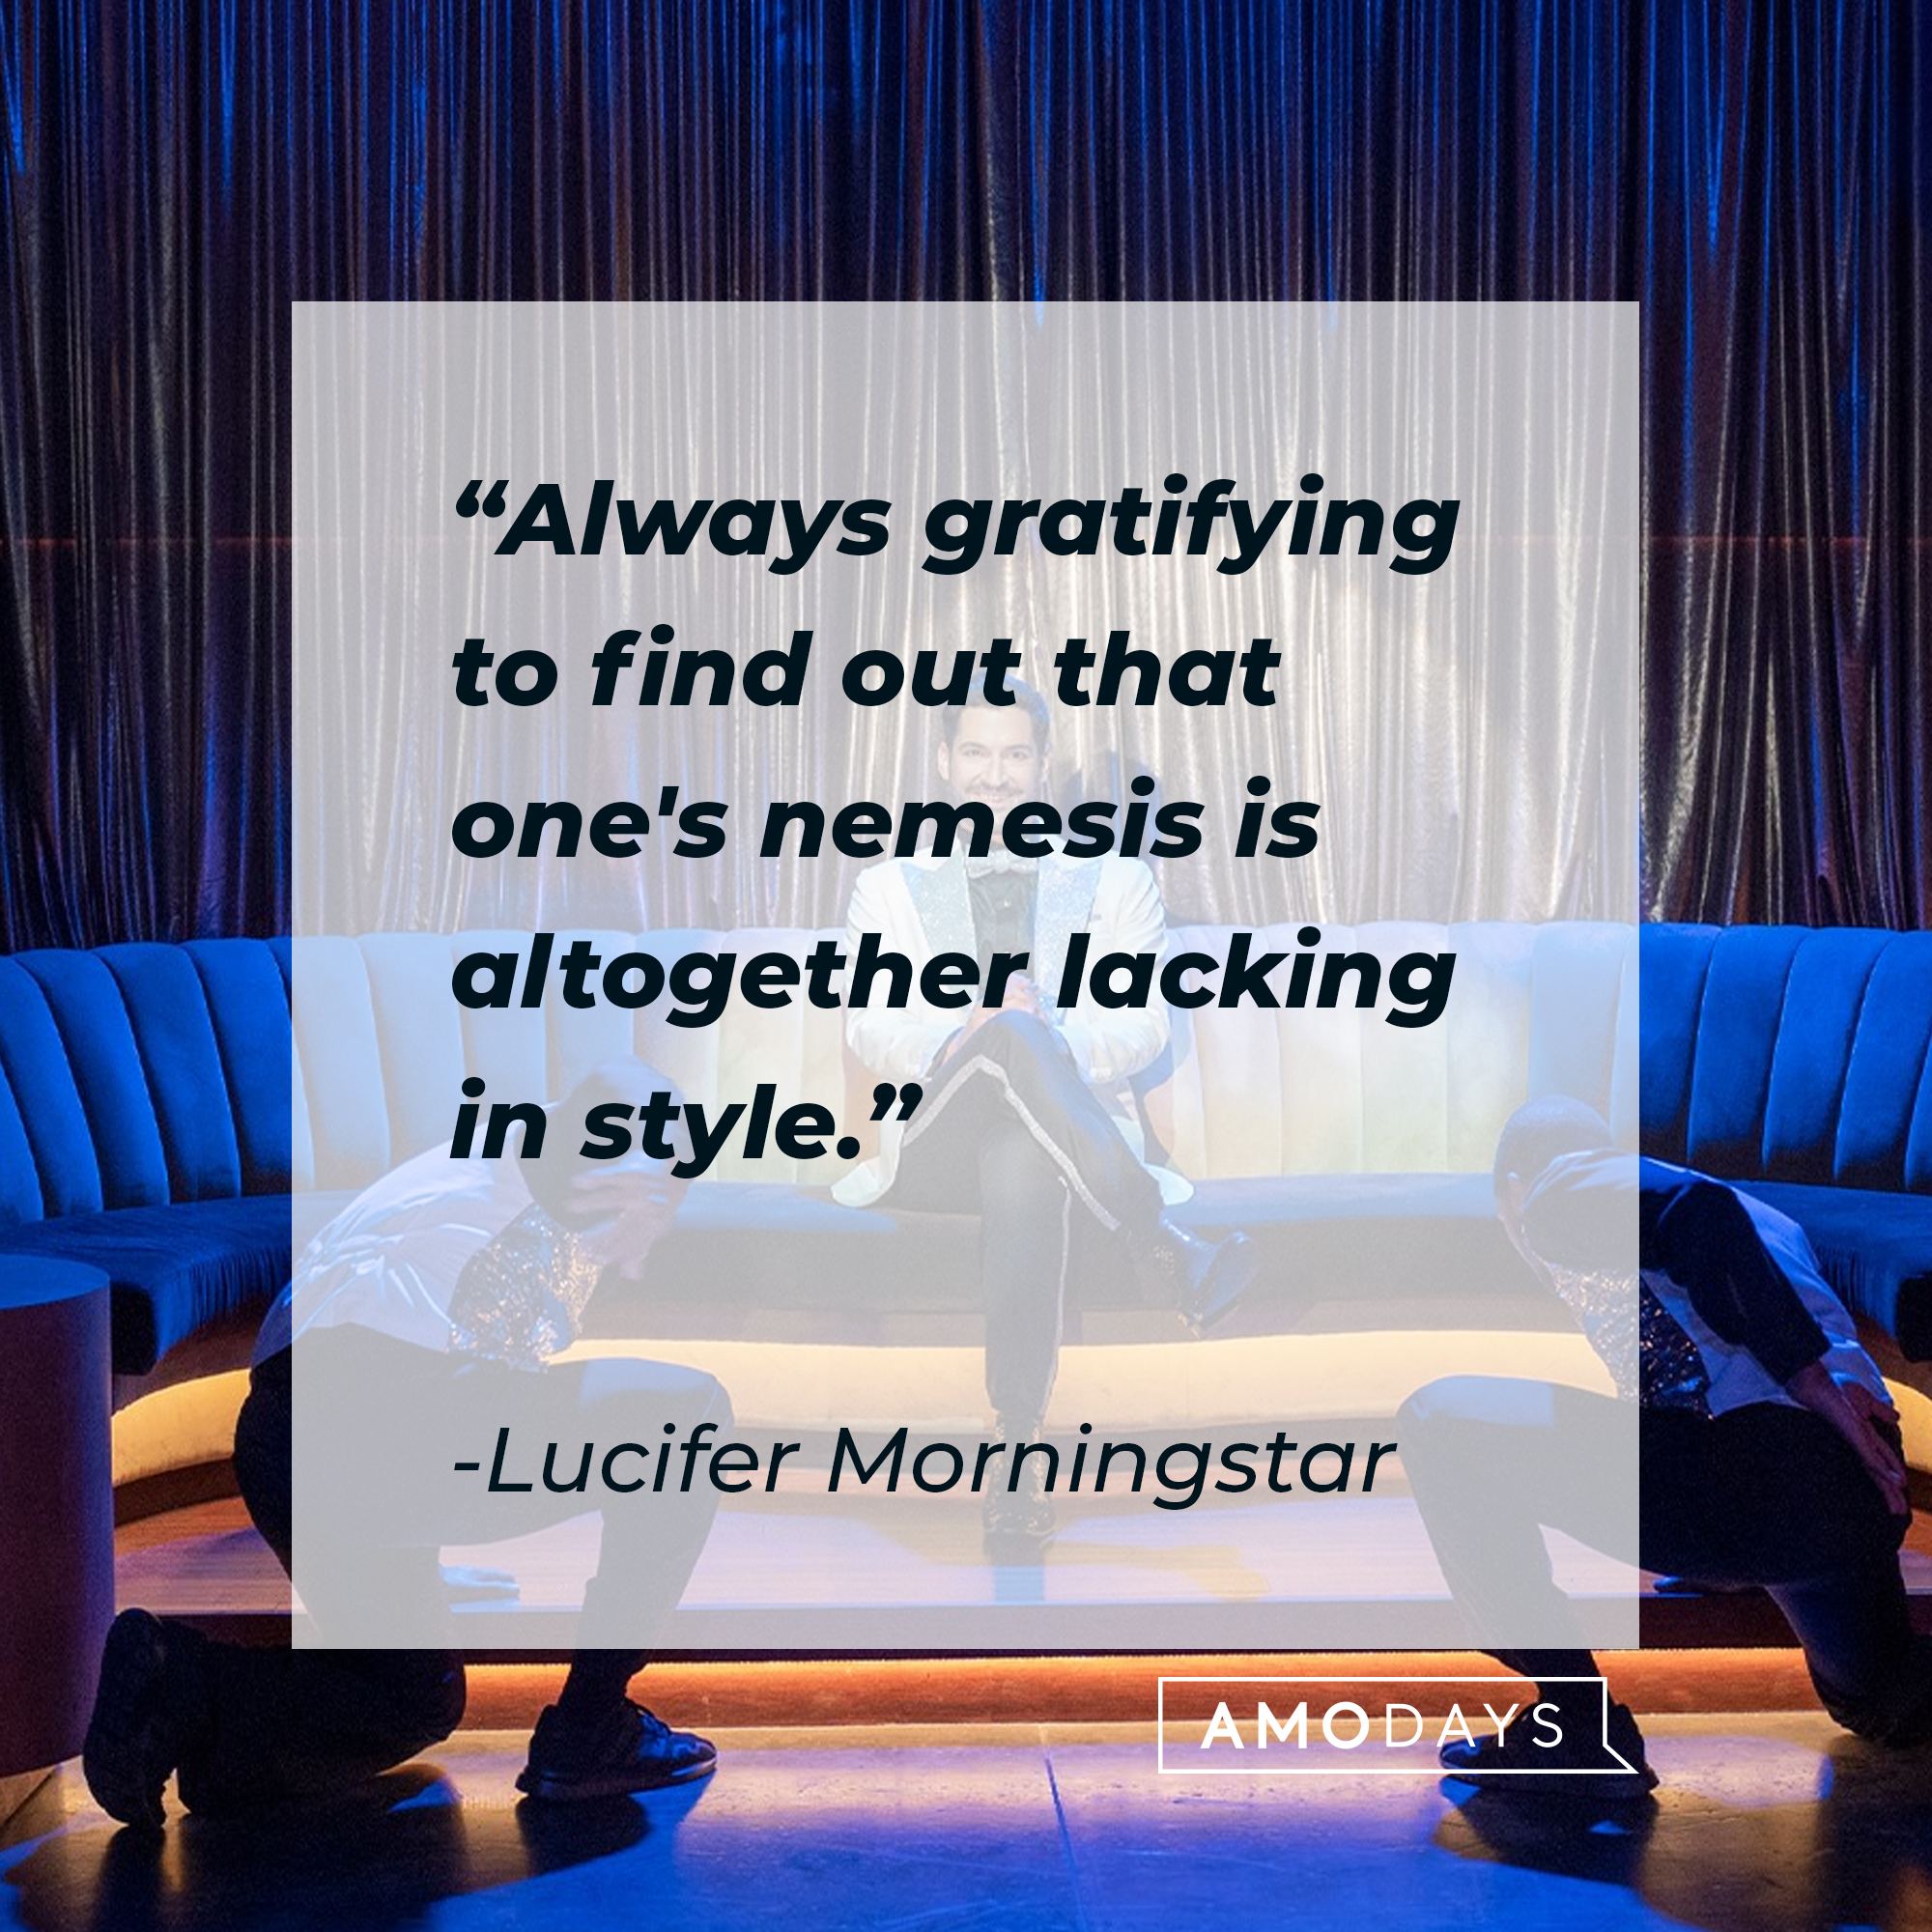 Lucifer Morningstar’s quote: "Always gratifying to find out that one's nemesis is altogether lacking in style." | Source: Facebook.com/LuciferNetflix